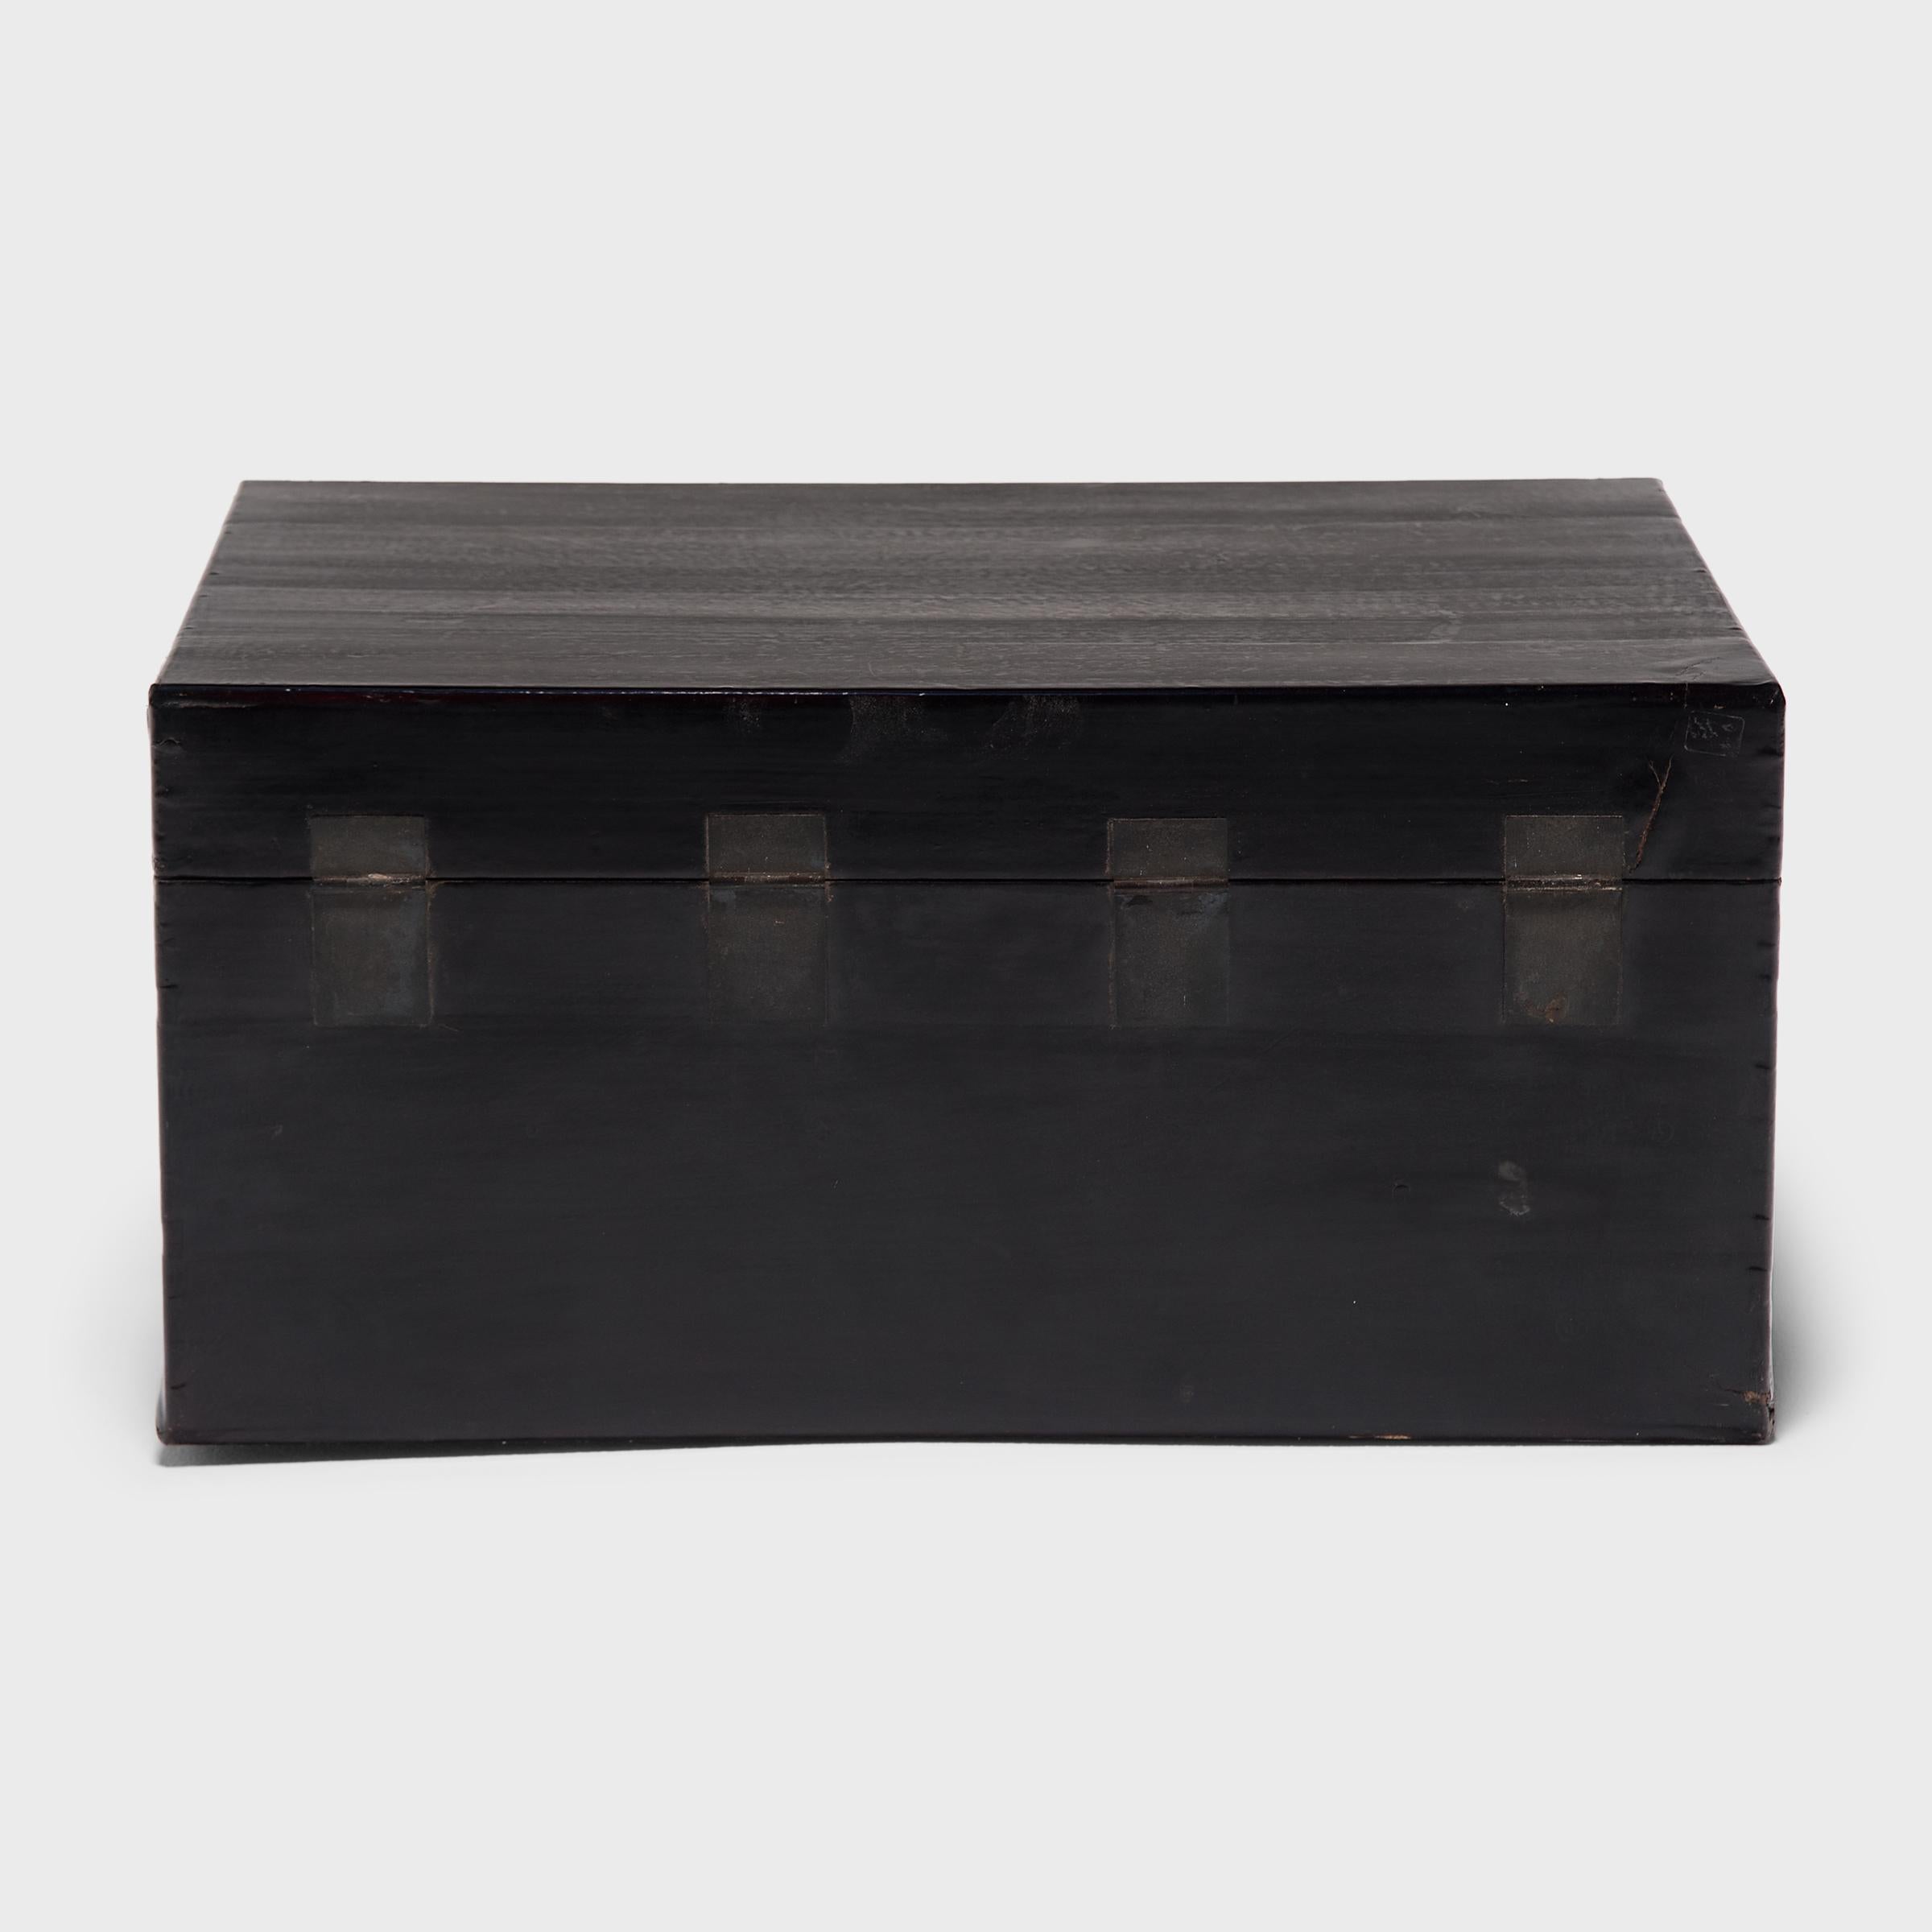 Qing Chinese Black Lacquer Hide Trunk, c. 1900